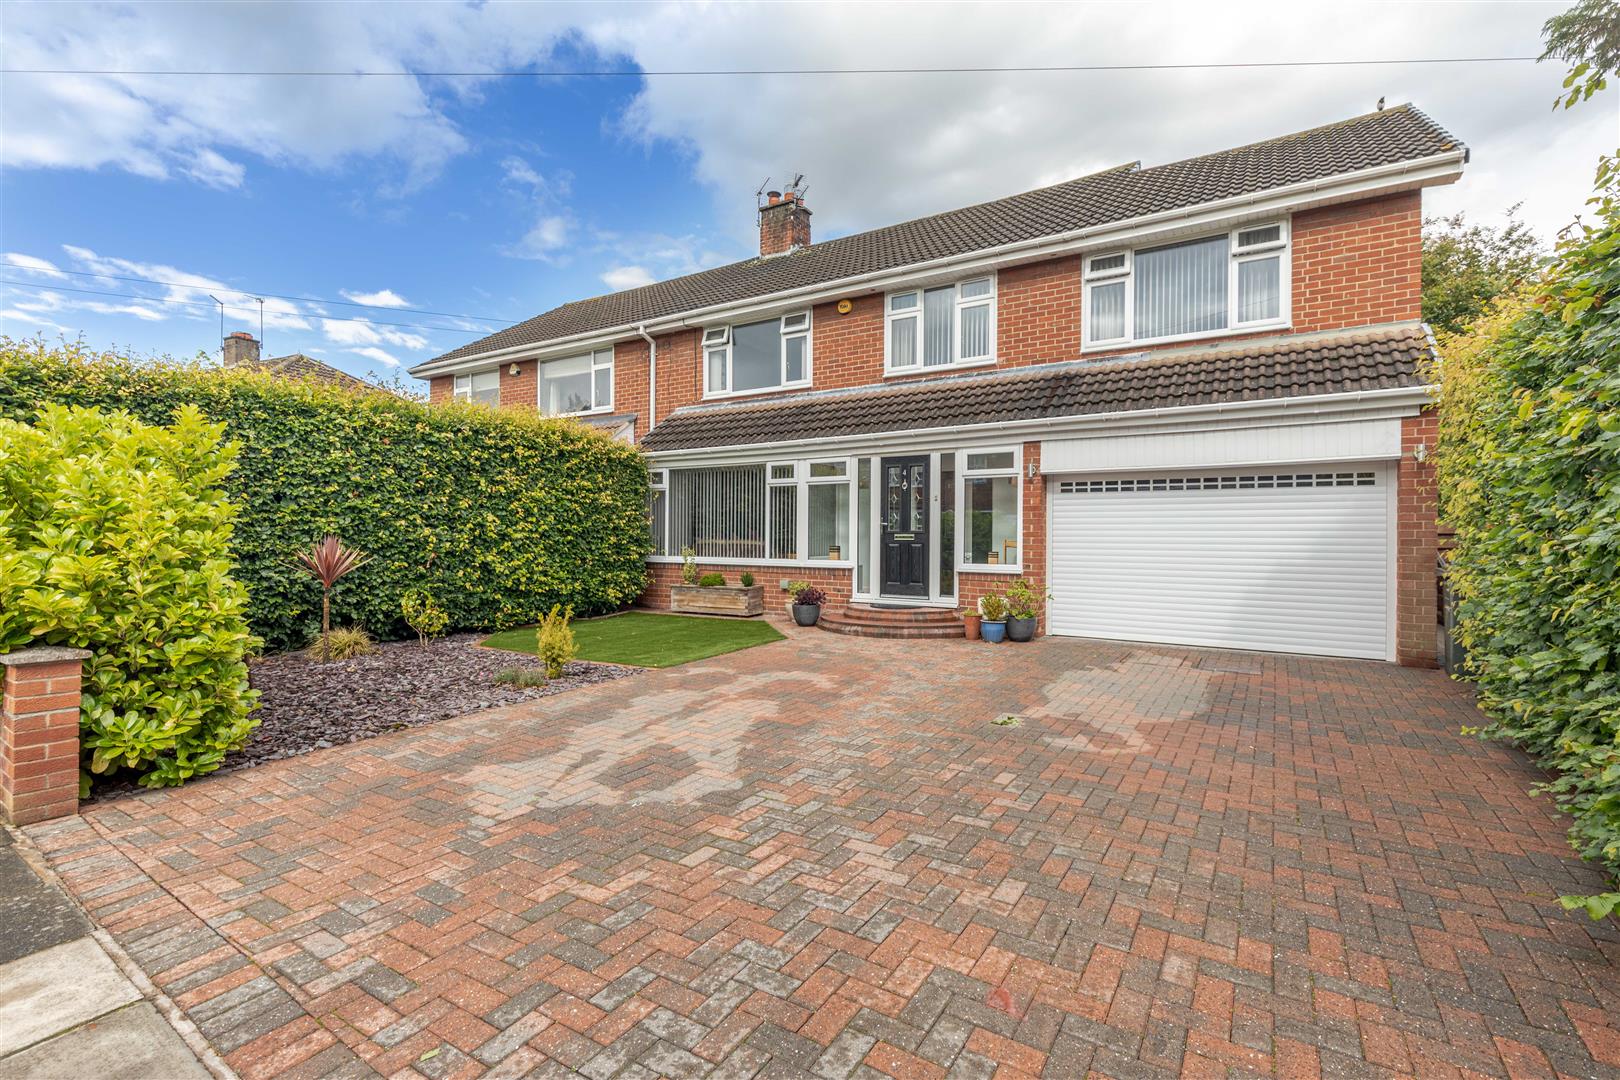 4 bed semi-detached house for sale in Easedale Avenue, Melton Park - Property Image 1